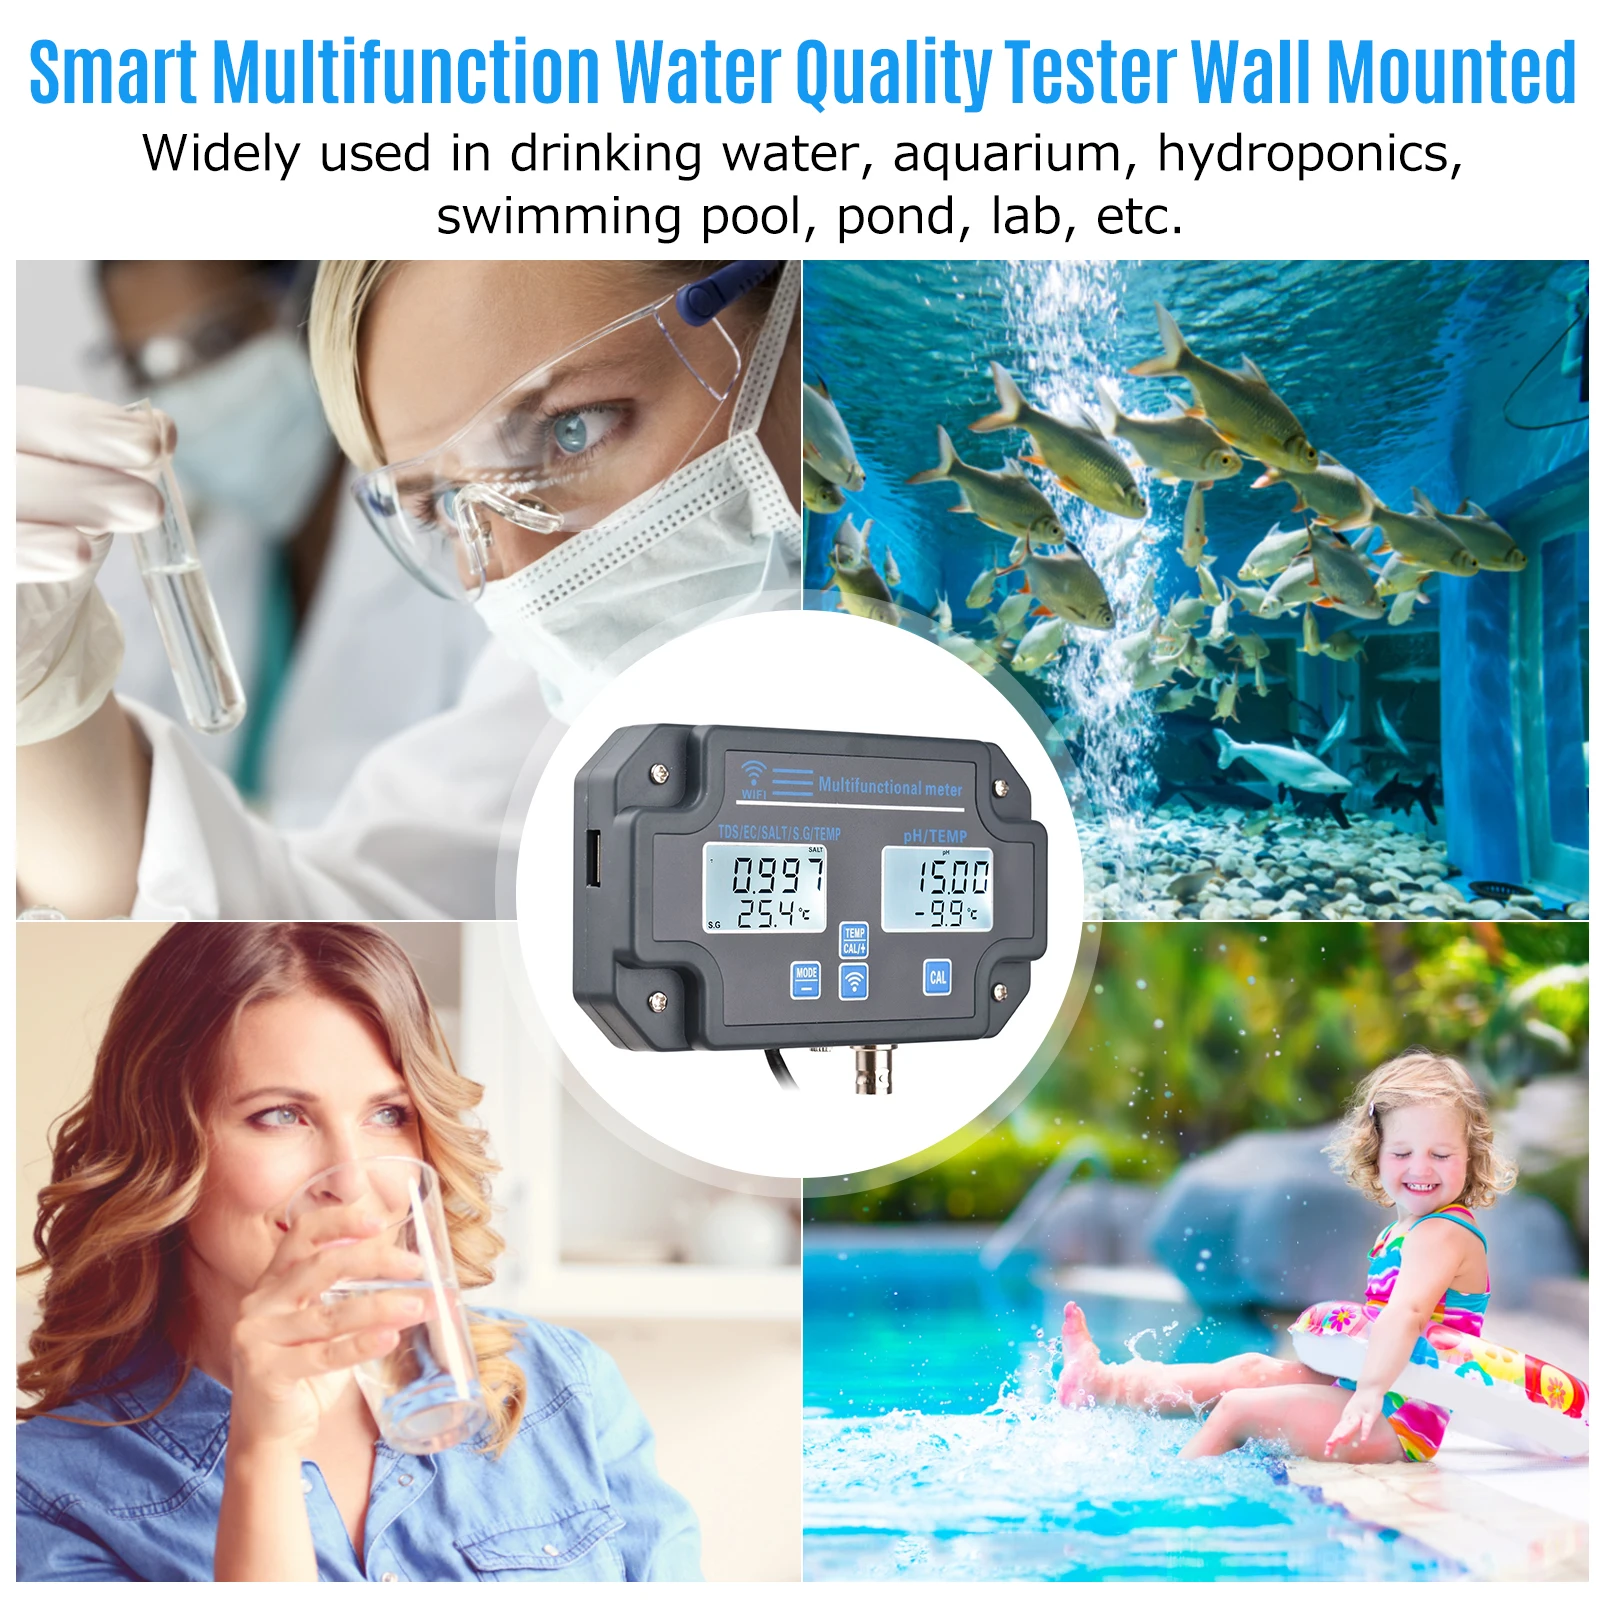 fowler caliper Wifi 6 in1 Water Quality Tester Wall Mounted Water Analyzer PH/EC/TDS/SALT/G.S/Temperature APP Remote Monitoring Sound Notice radiation survey meter